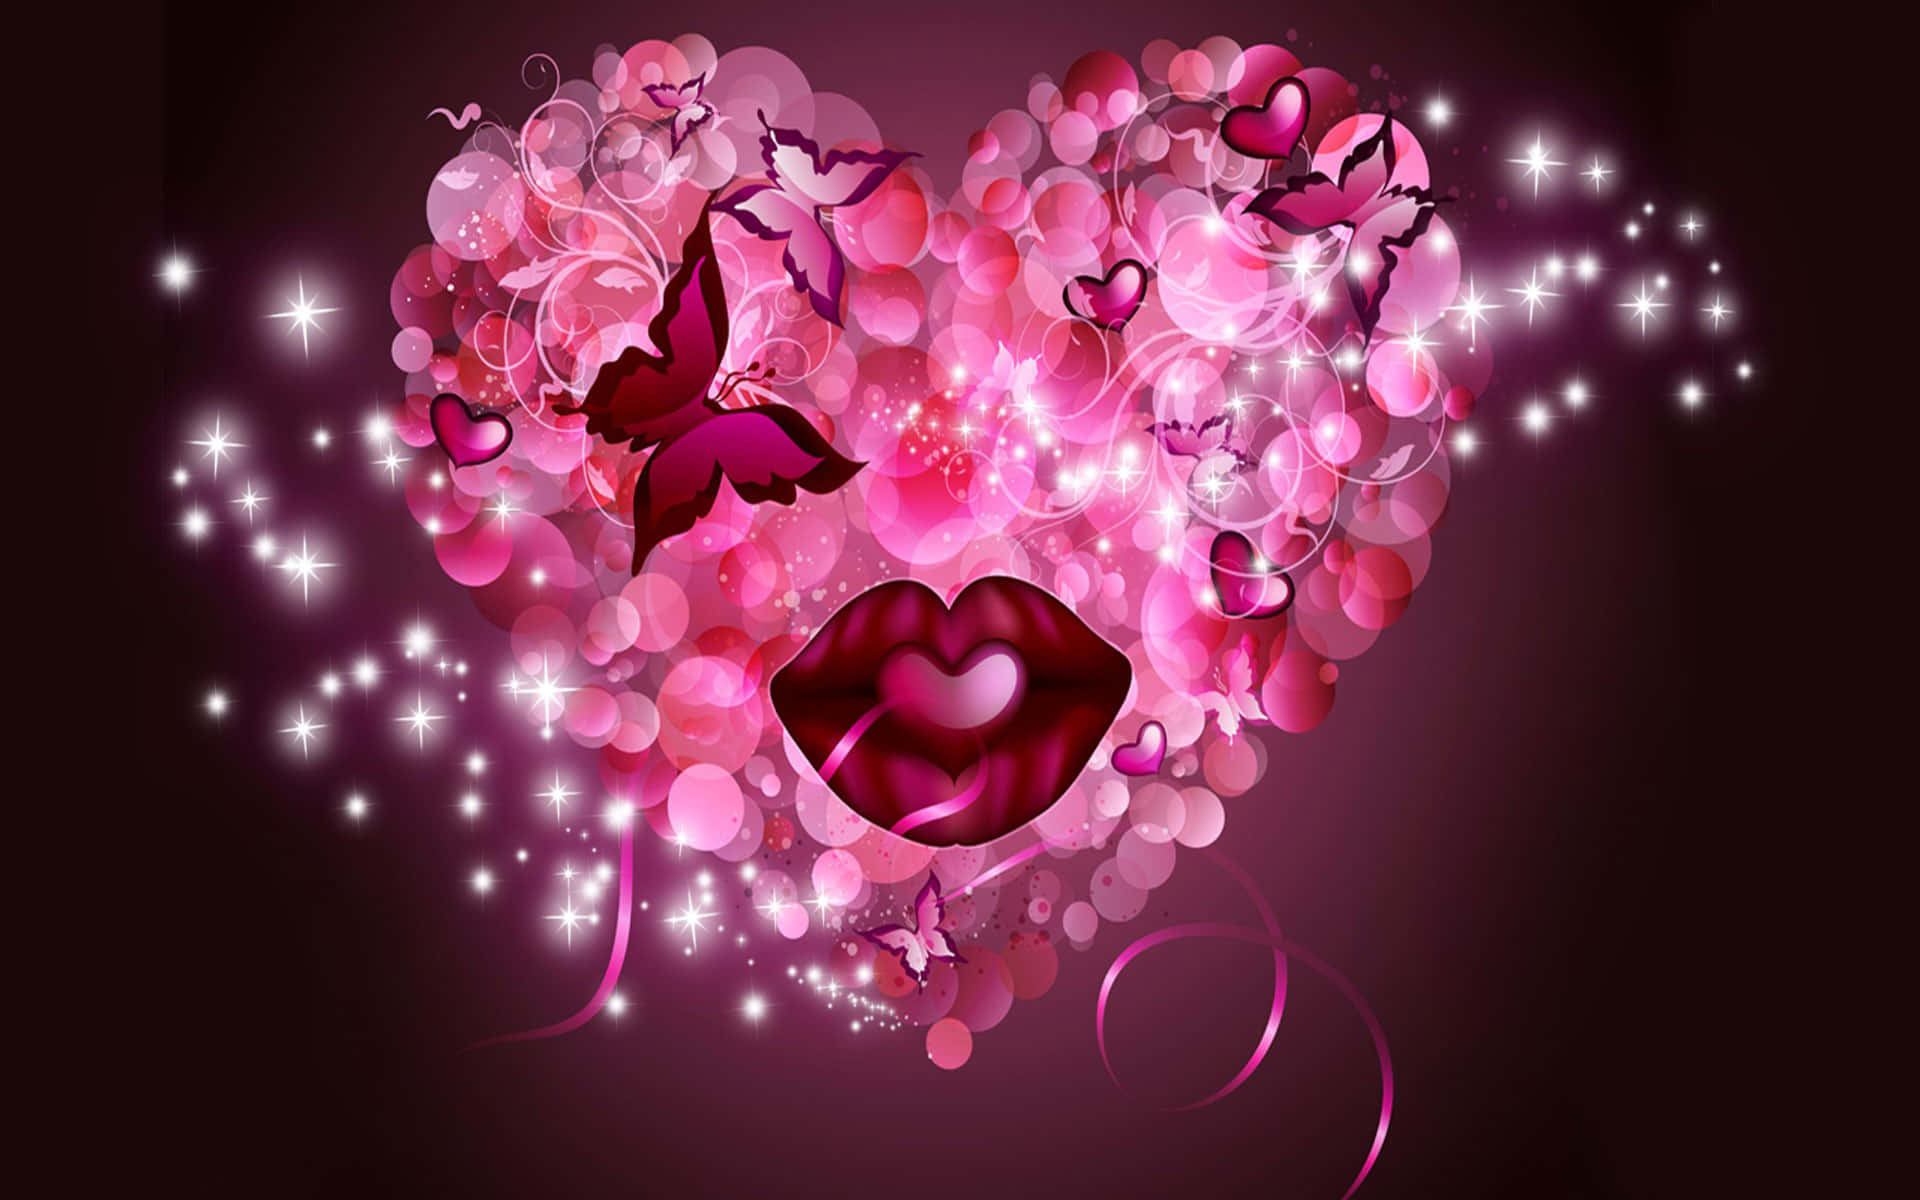 A vibrant expression of Pink Love Wallpaper